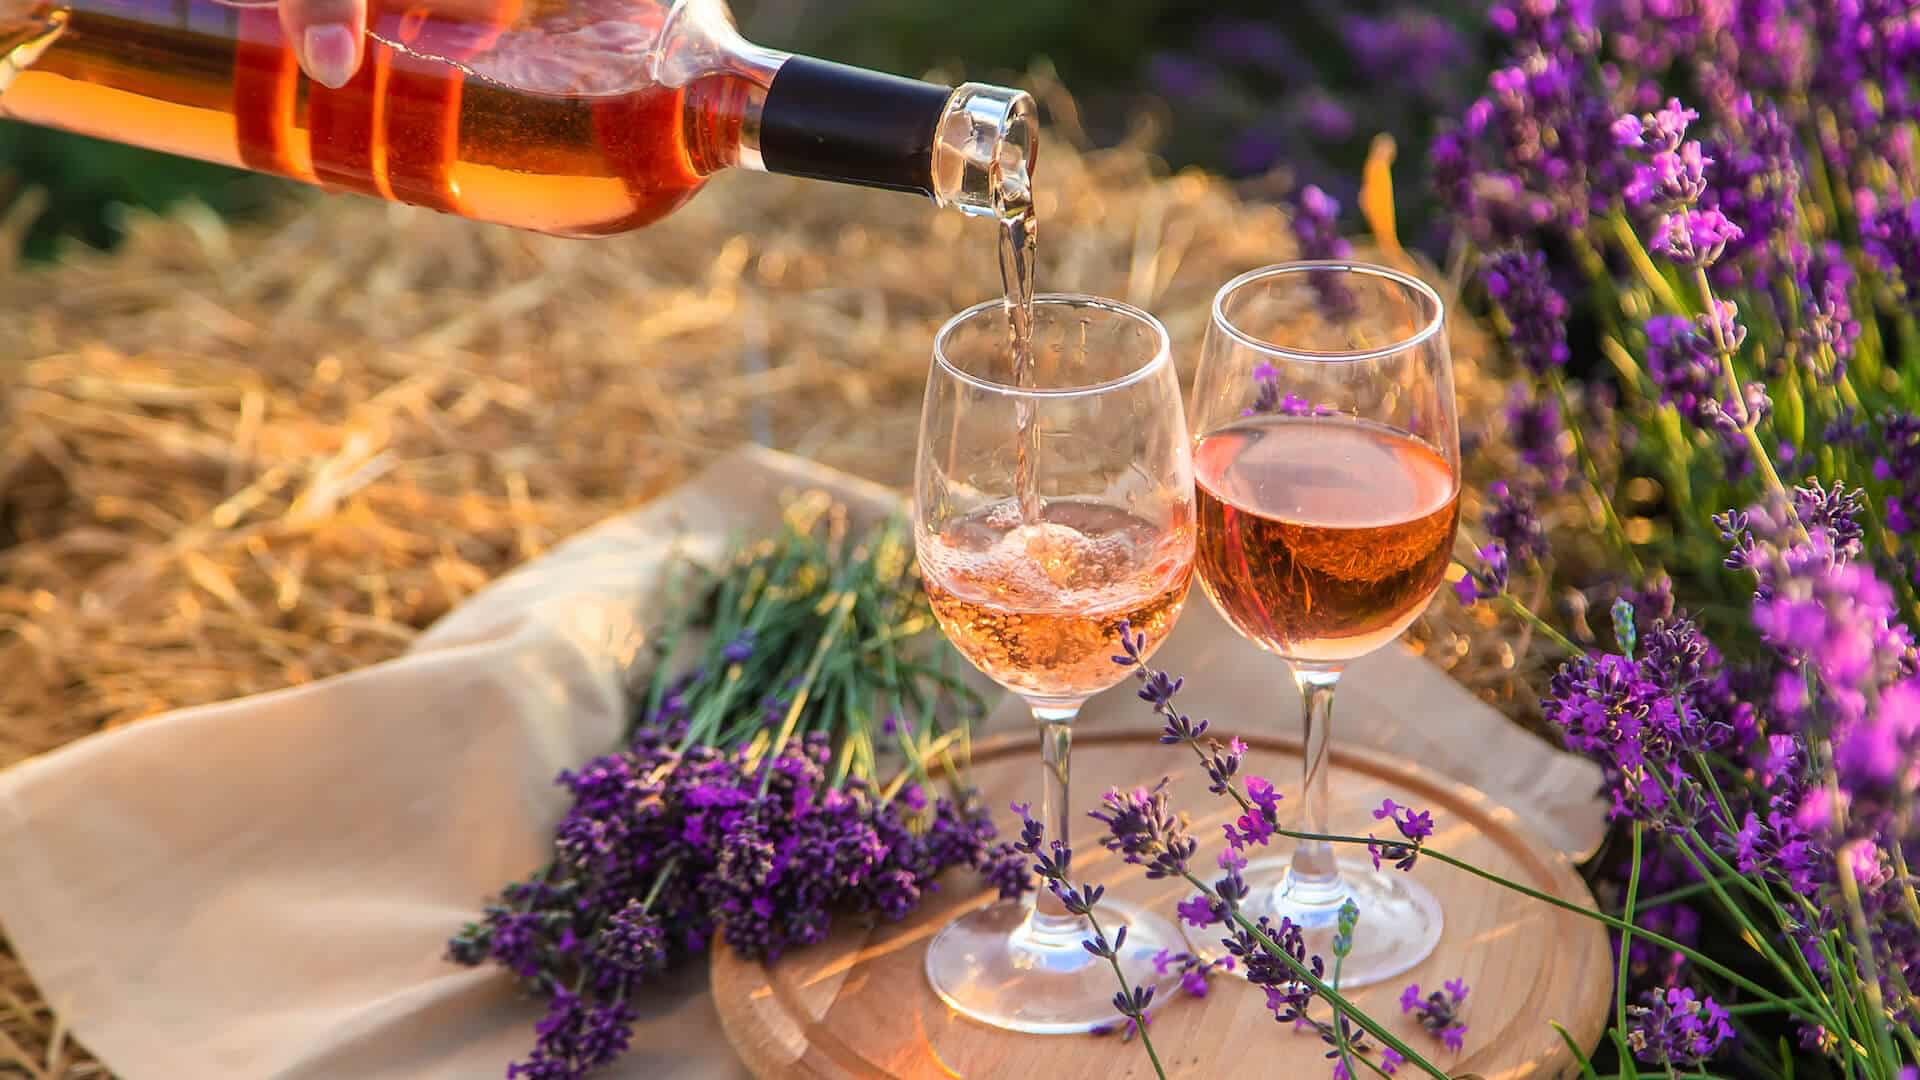 A bottle of blush pink wine being poured into 2 wine glasses on a wood tray with a handful of fresh purple flowers next to the tray.